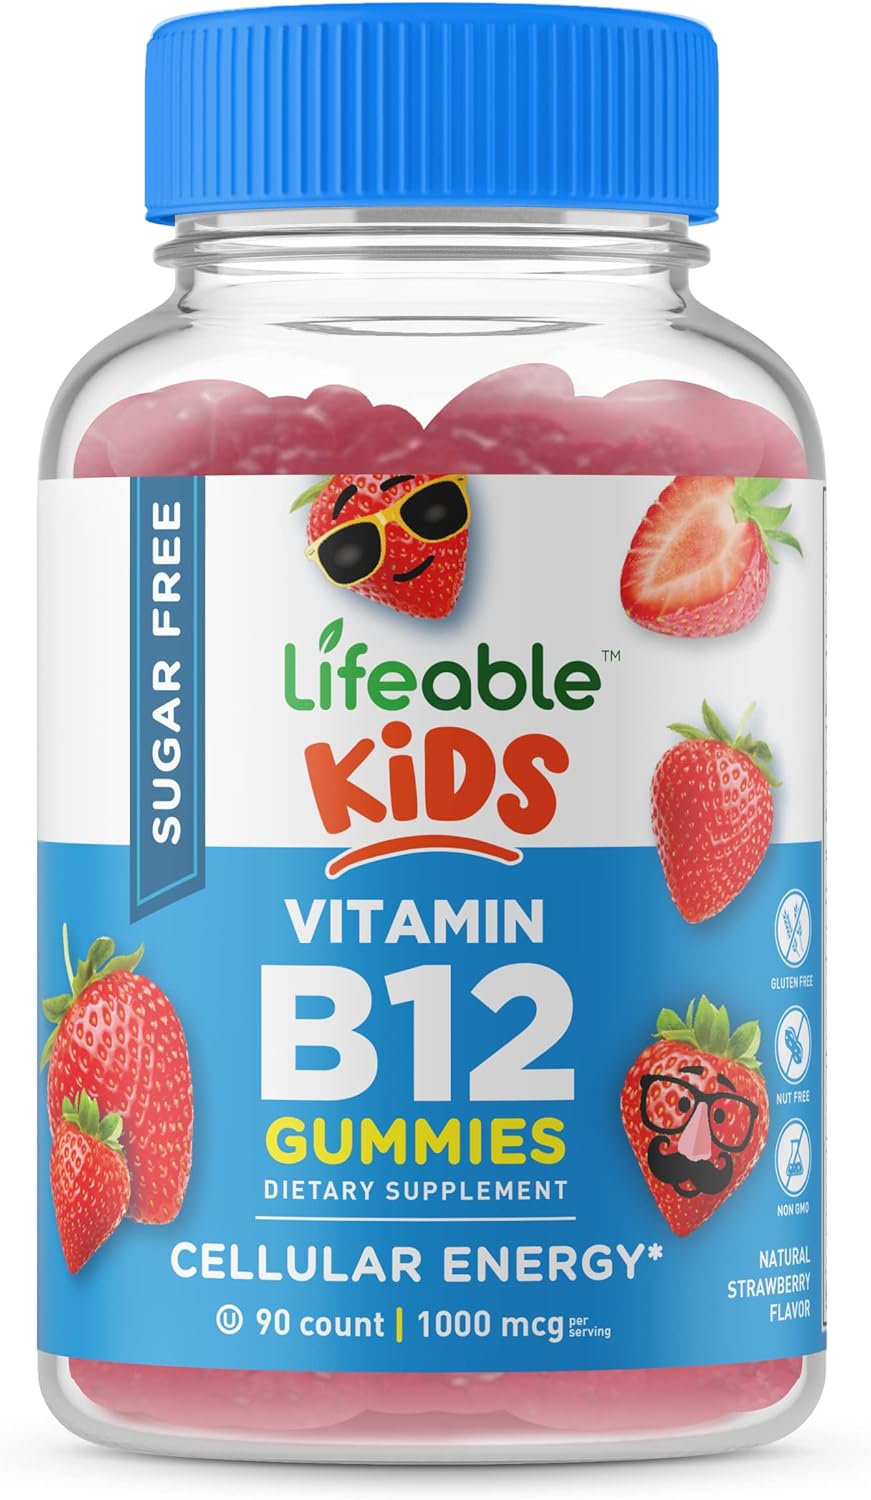 Lifeable Sugar Free Vitamin B12 for Kids - 1000 mcg - Great Tasting Natural Flavor Gummy Supplement - Gluten Free Vegetarian GMO-Free Chewable - Energy Mood Metabolism Support - for Kids - 90 Gummies